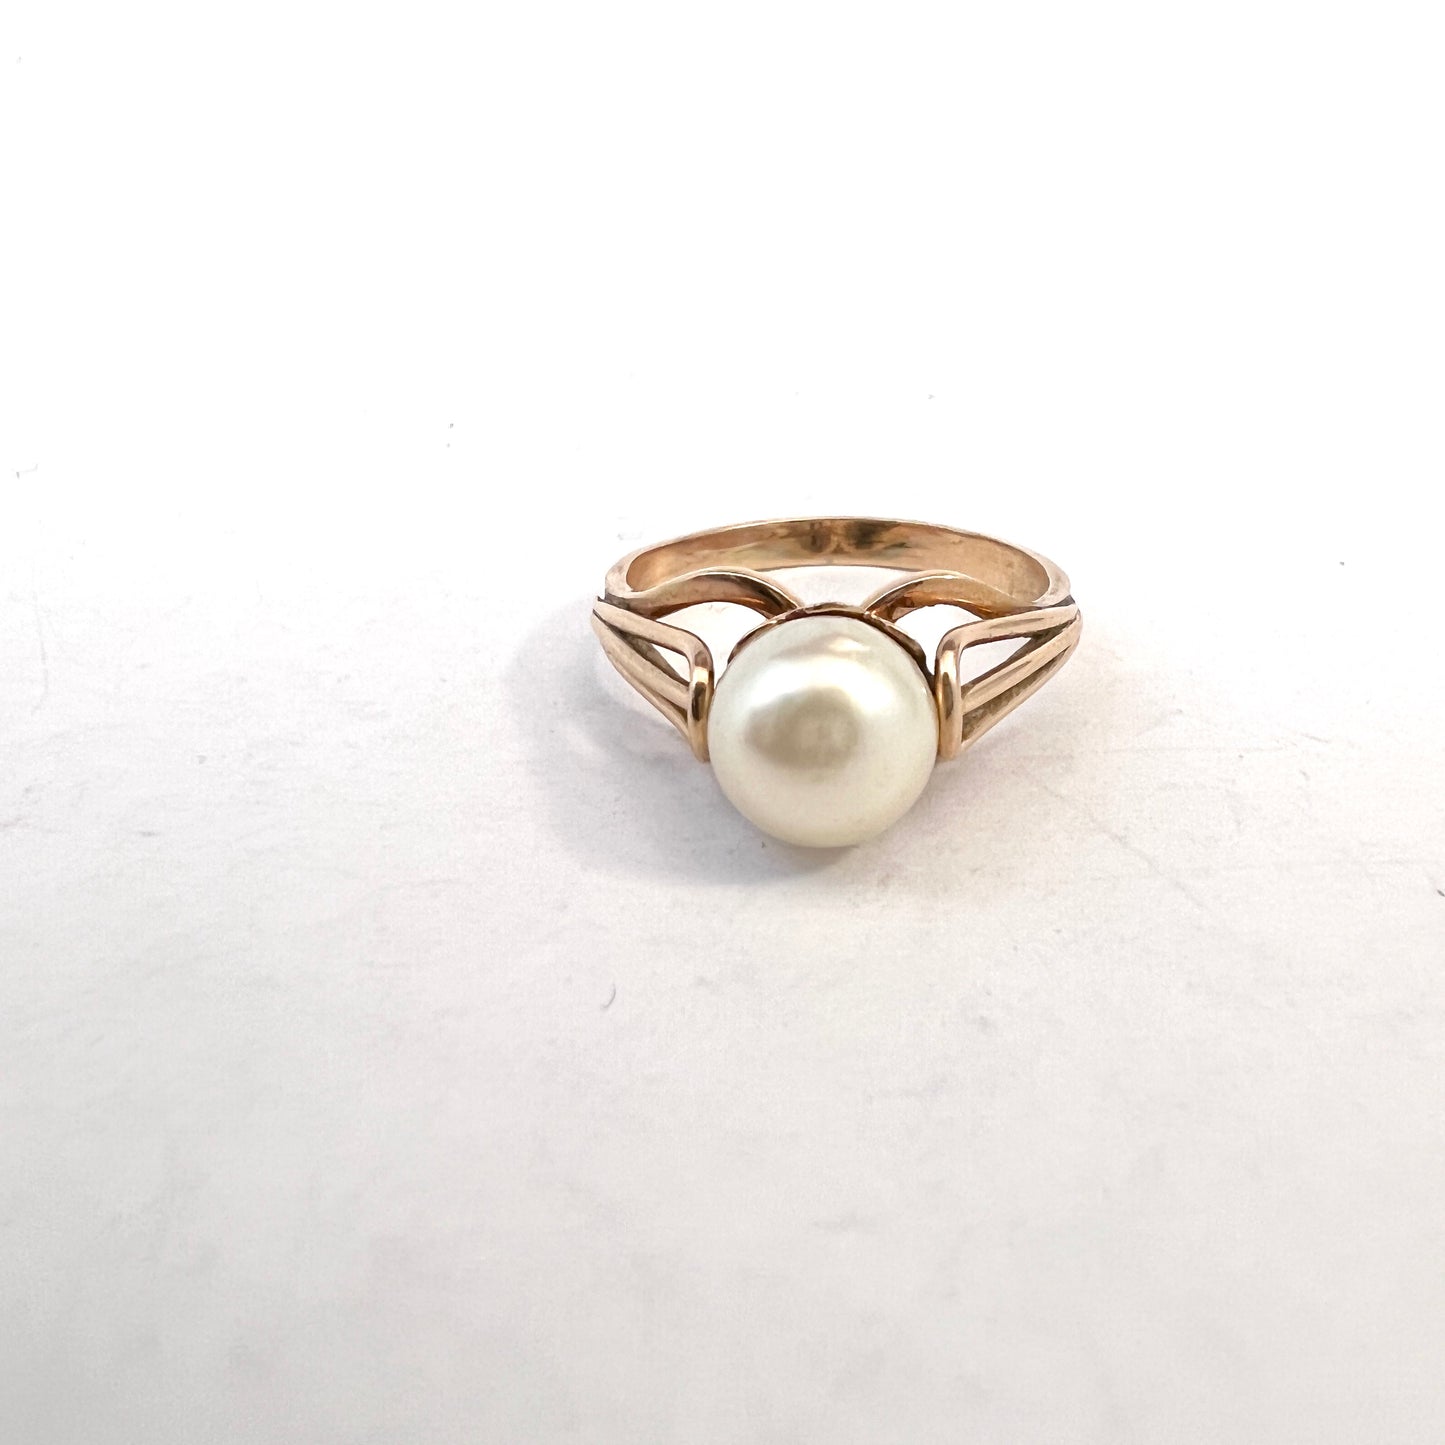 Vintage Mid-Century 14k Gold Cultured Pearl Ring.